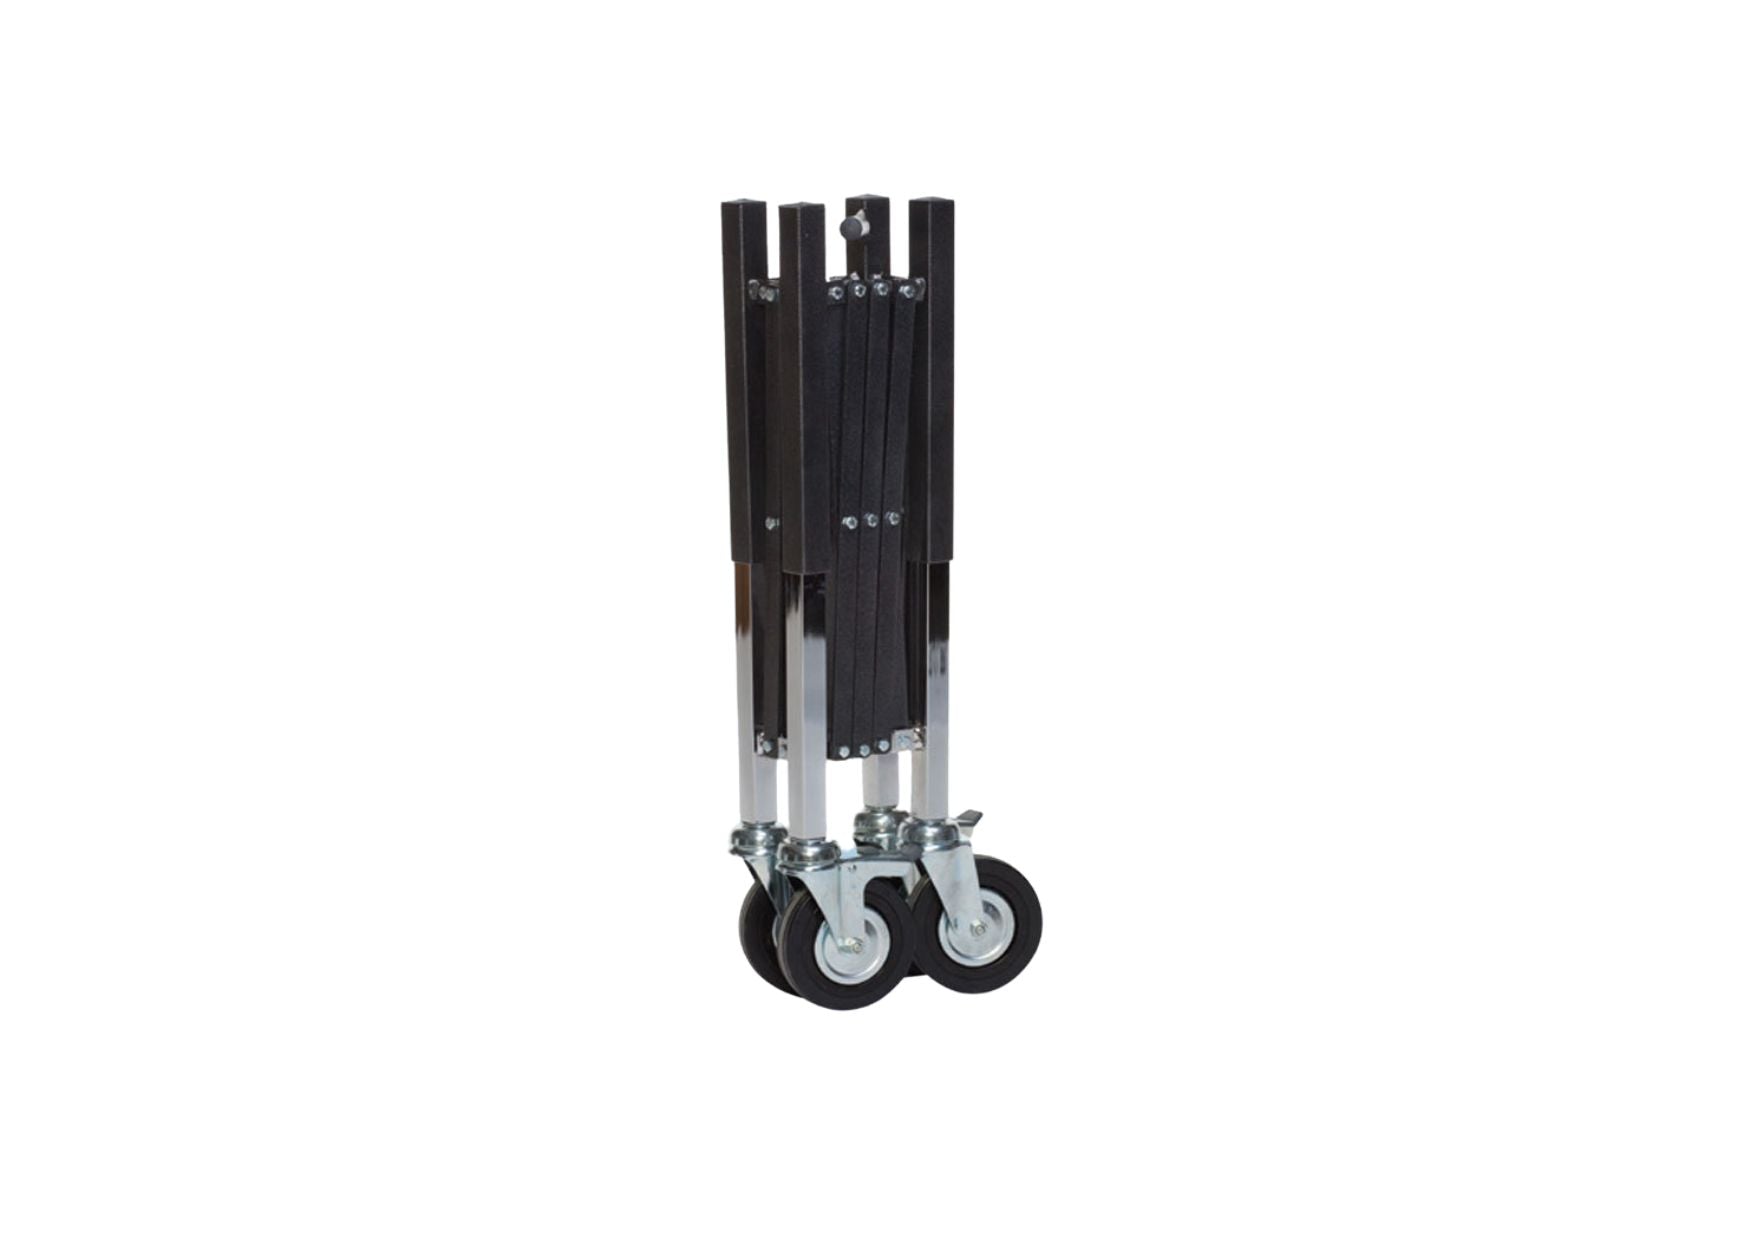 Scissor trolley can be pulled lengthways and crossways